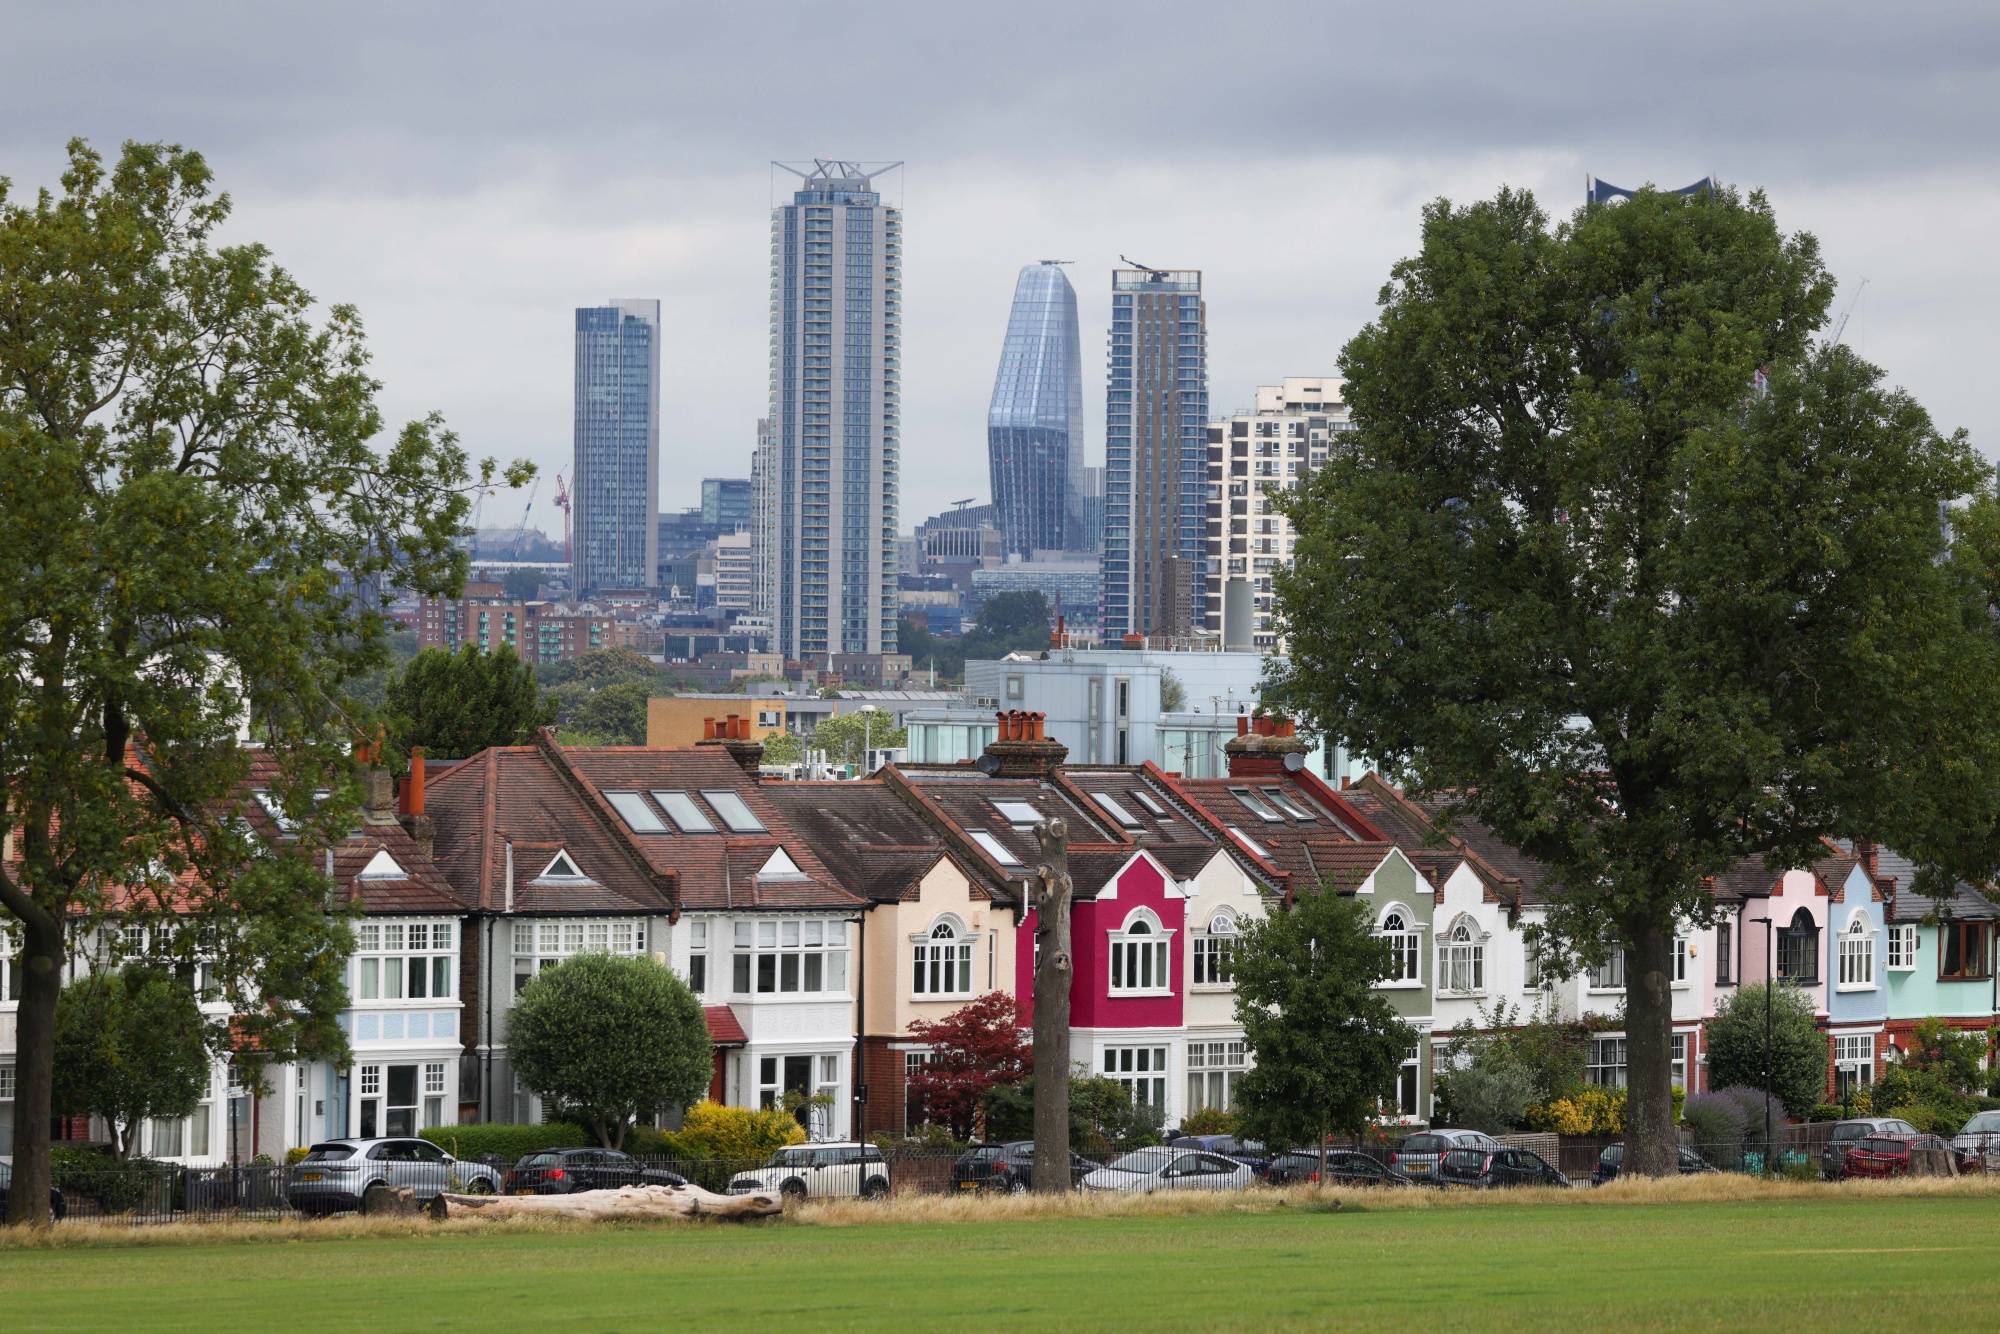 CityLab Daily: High London Rents are Pricing Out Young People - Bloomberg